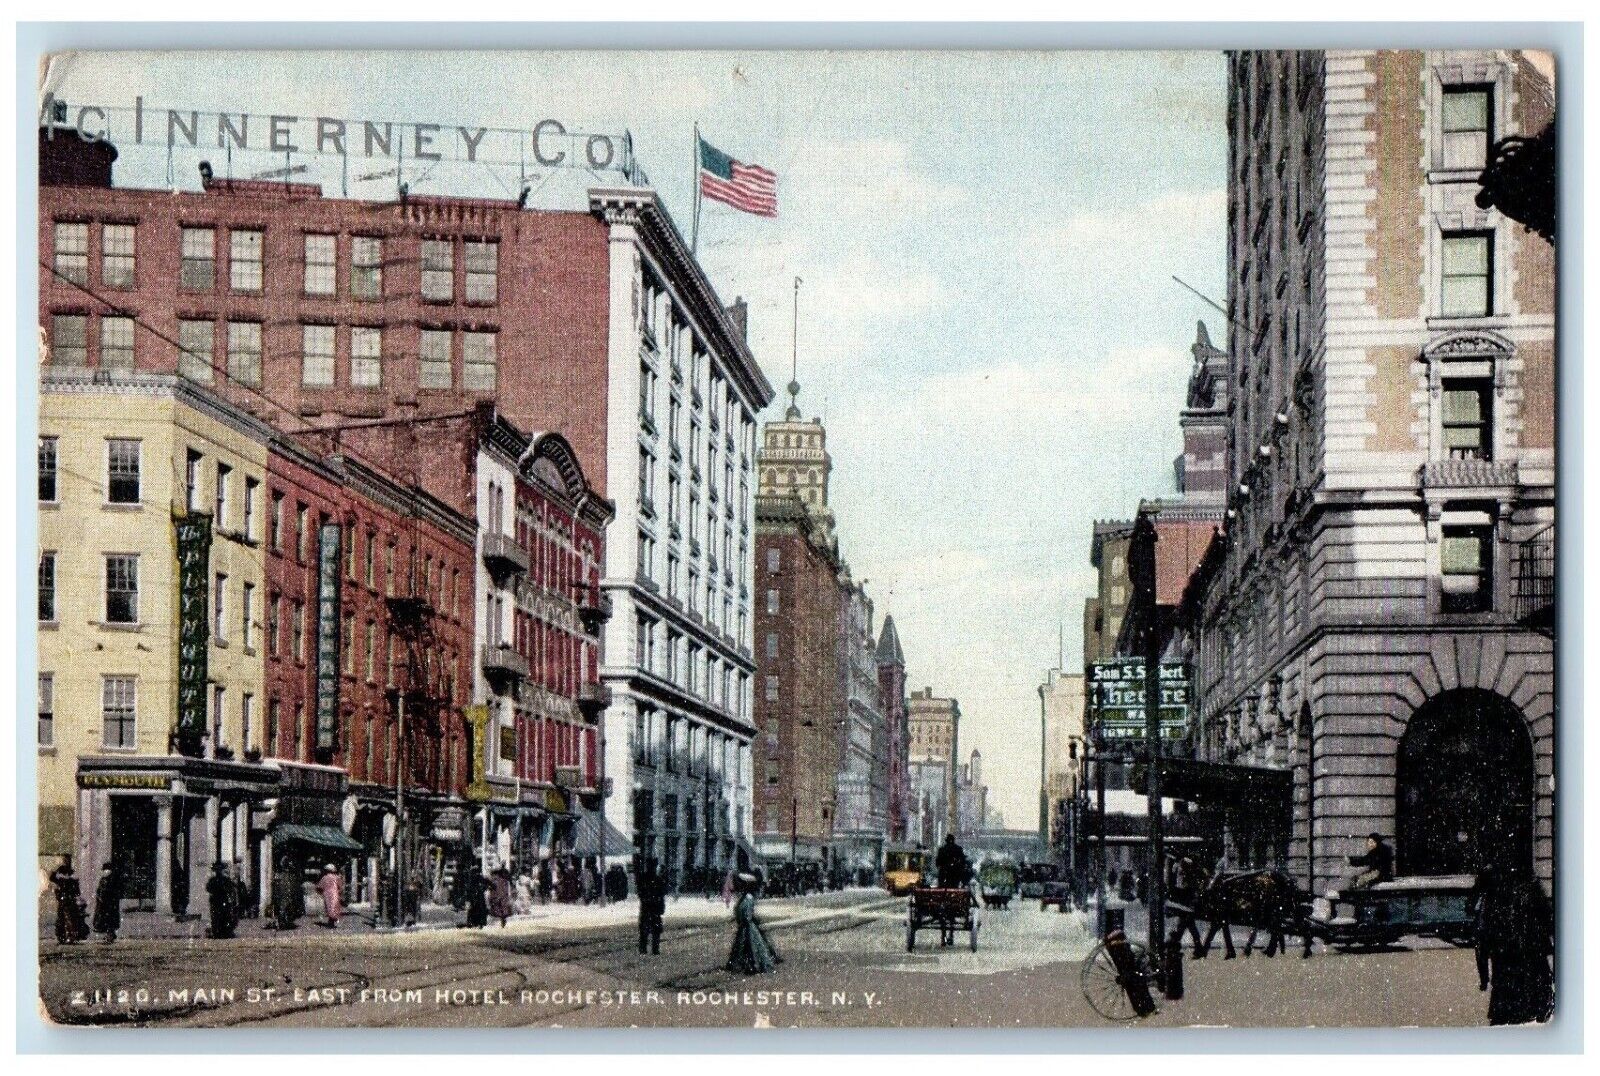 1913 Rochester NY, Main St. East From Hotel Rochester Innerney Co. Postcard